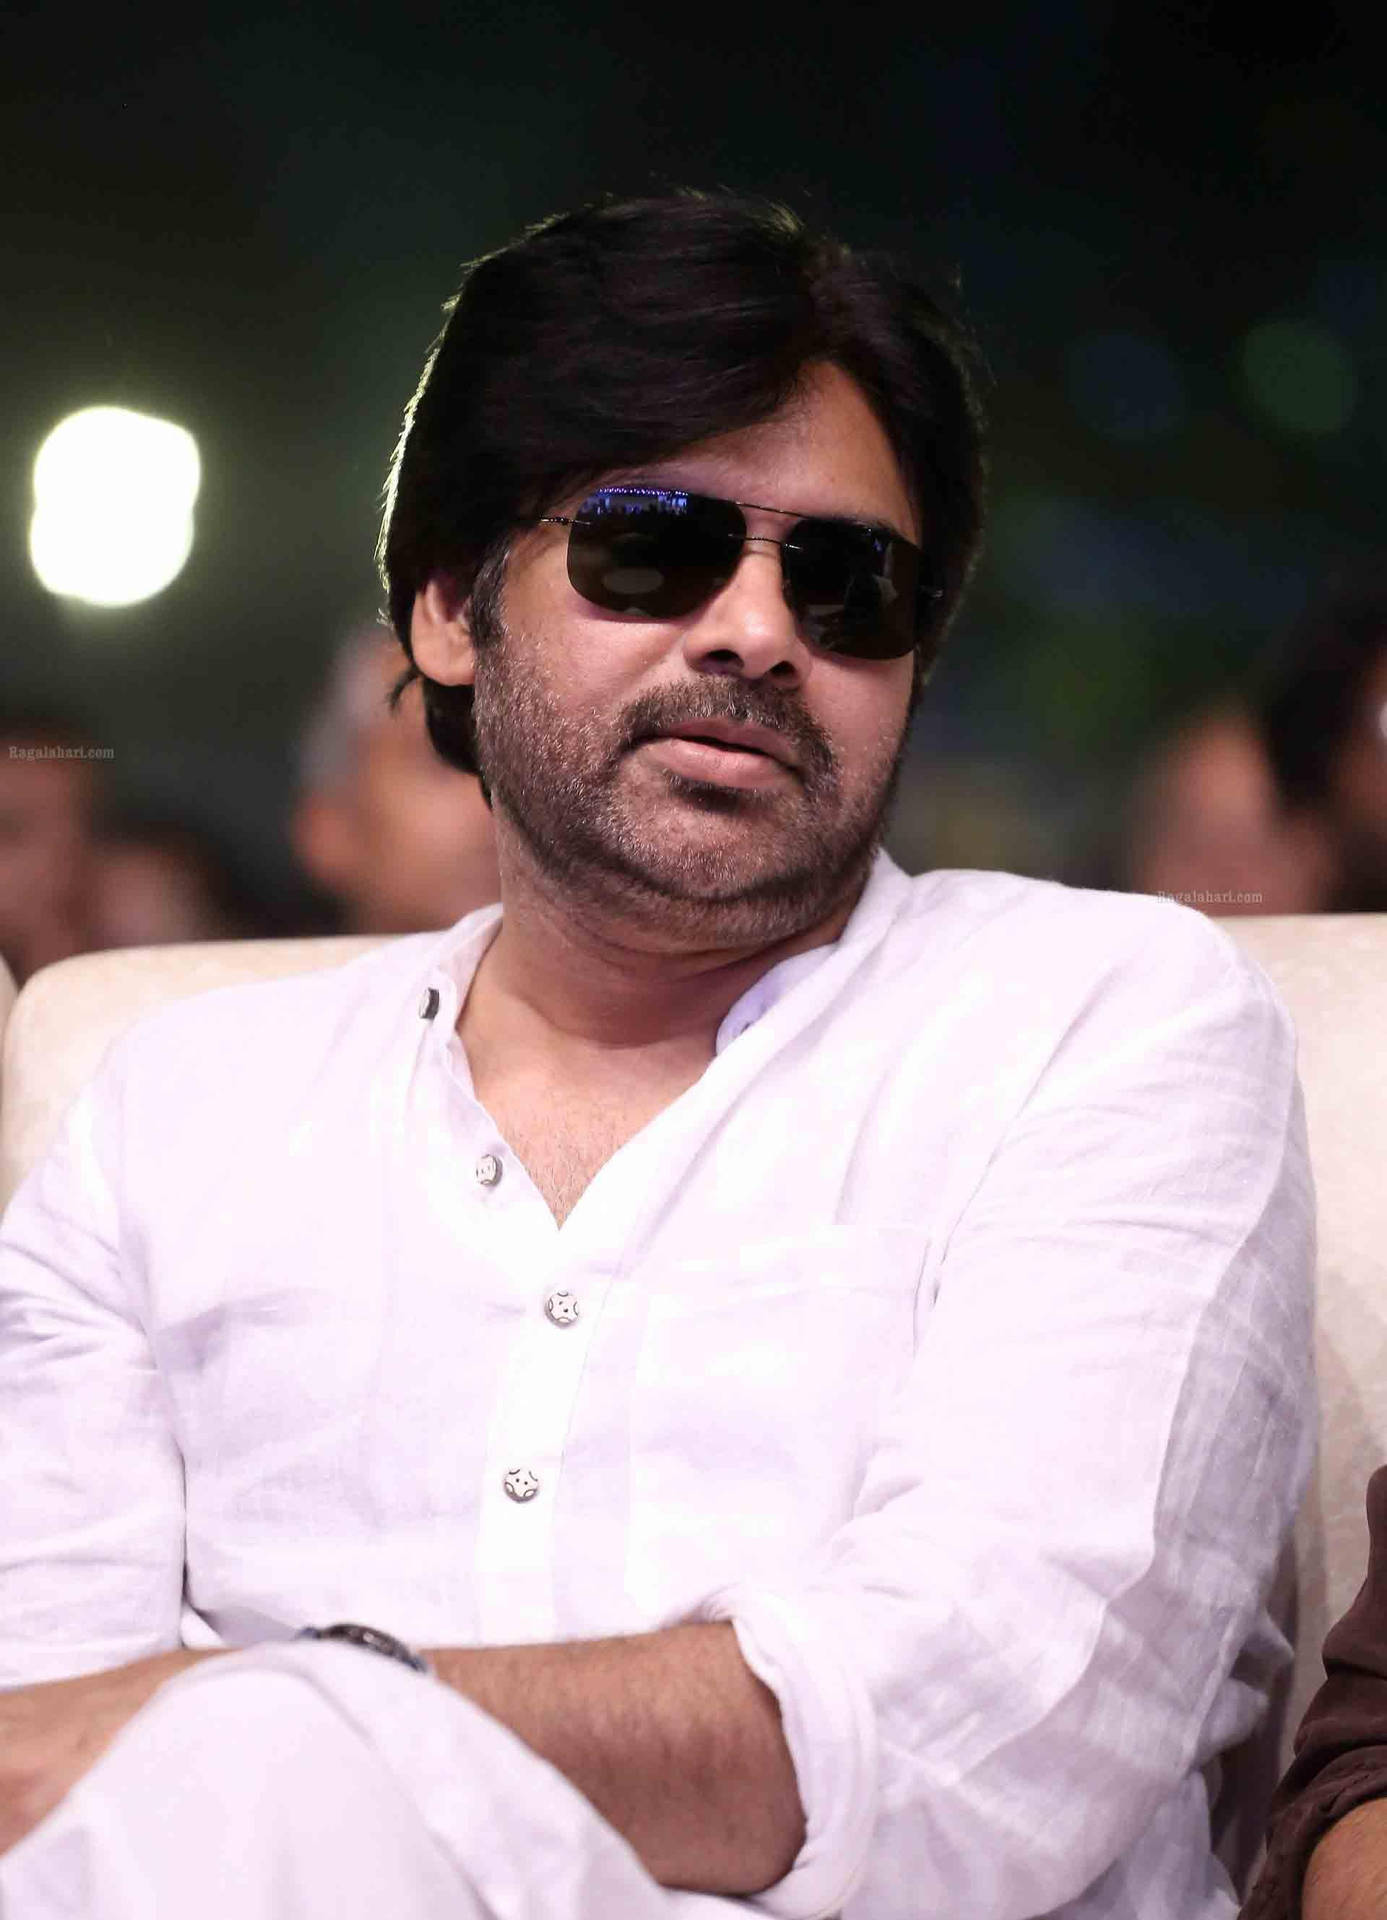 Pspk In White Shirt And Sunglasses Background